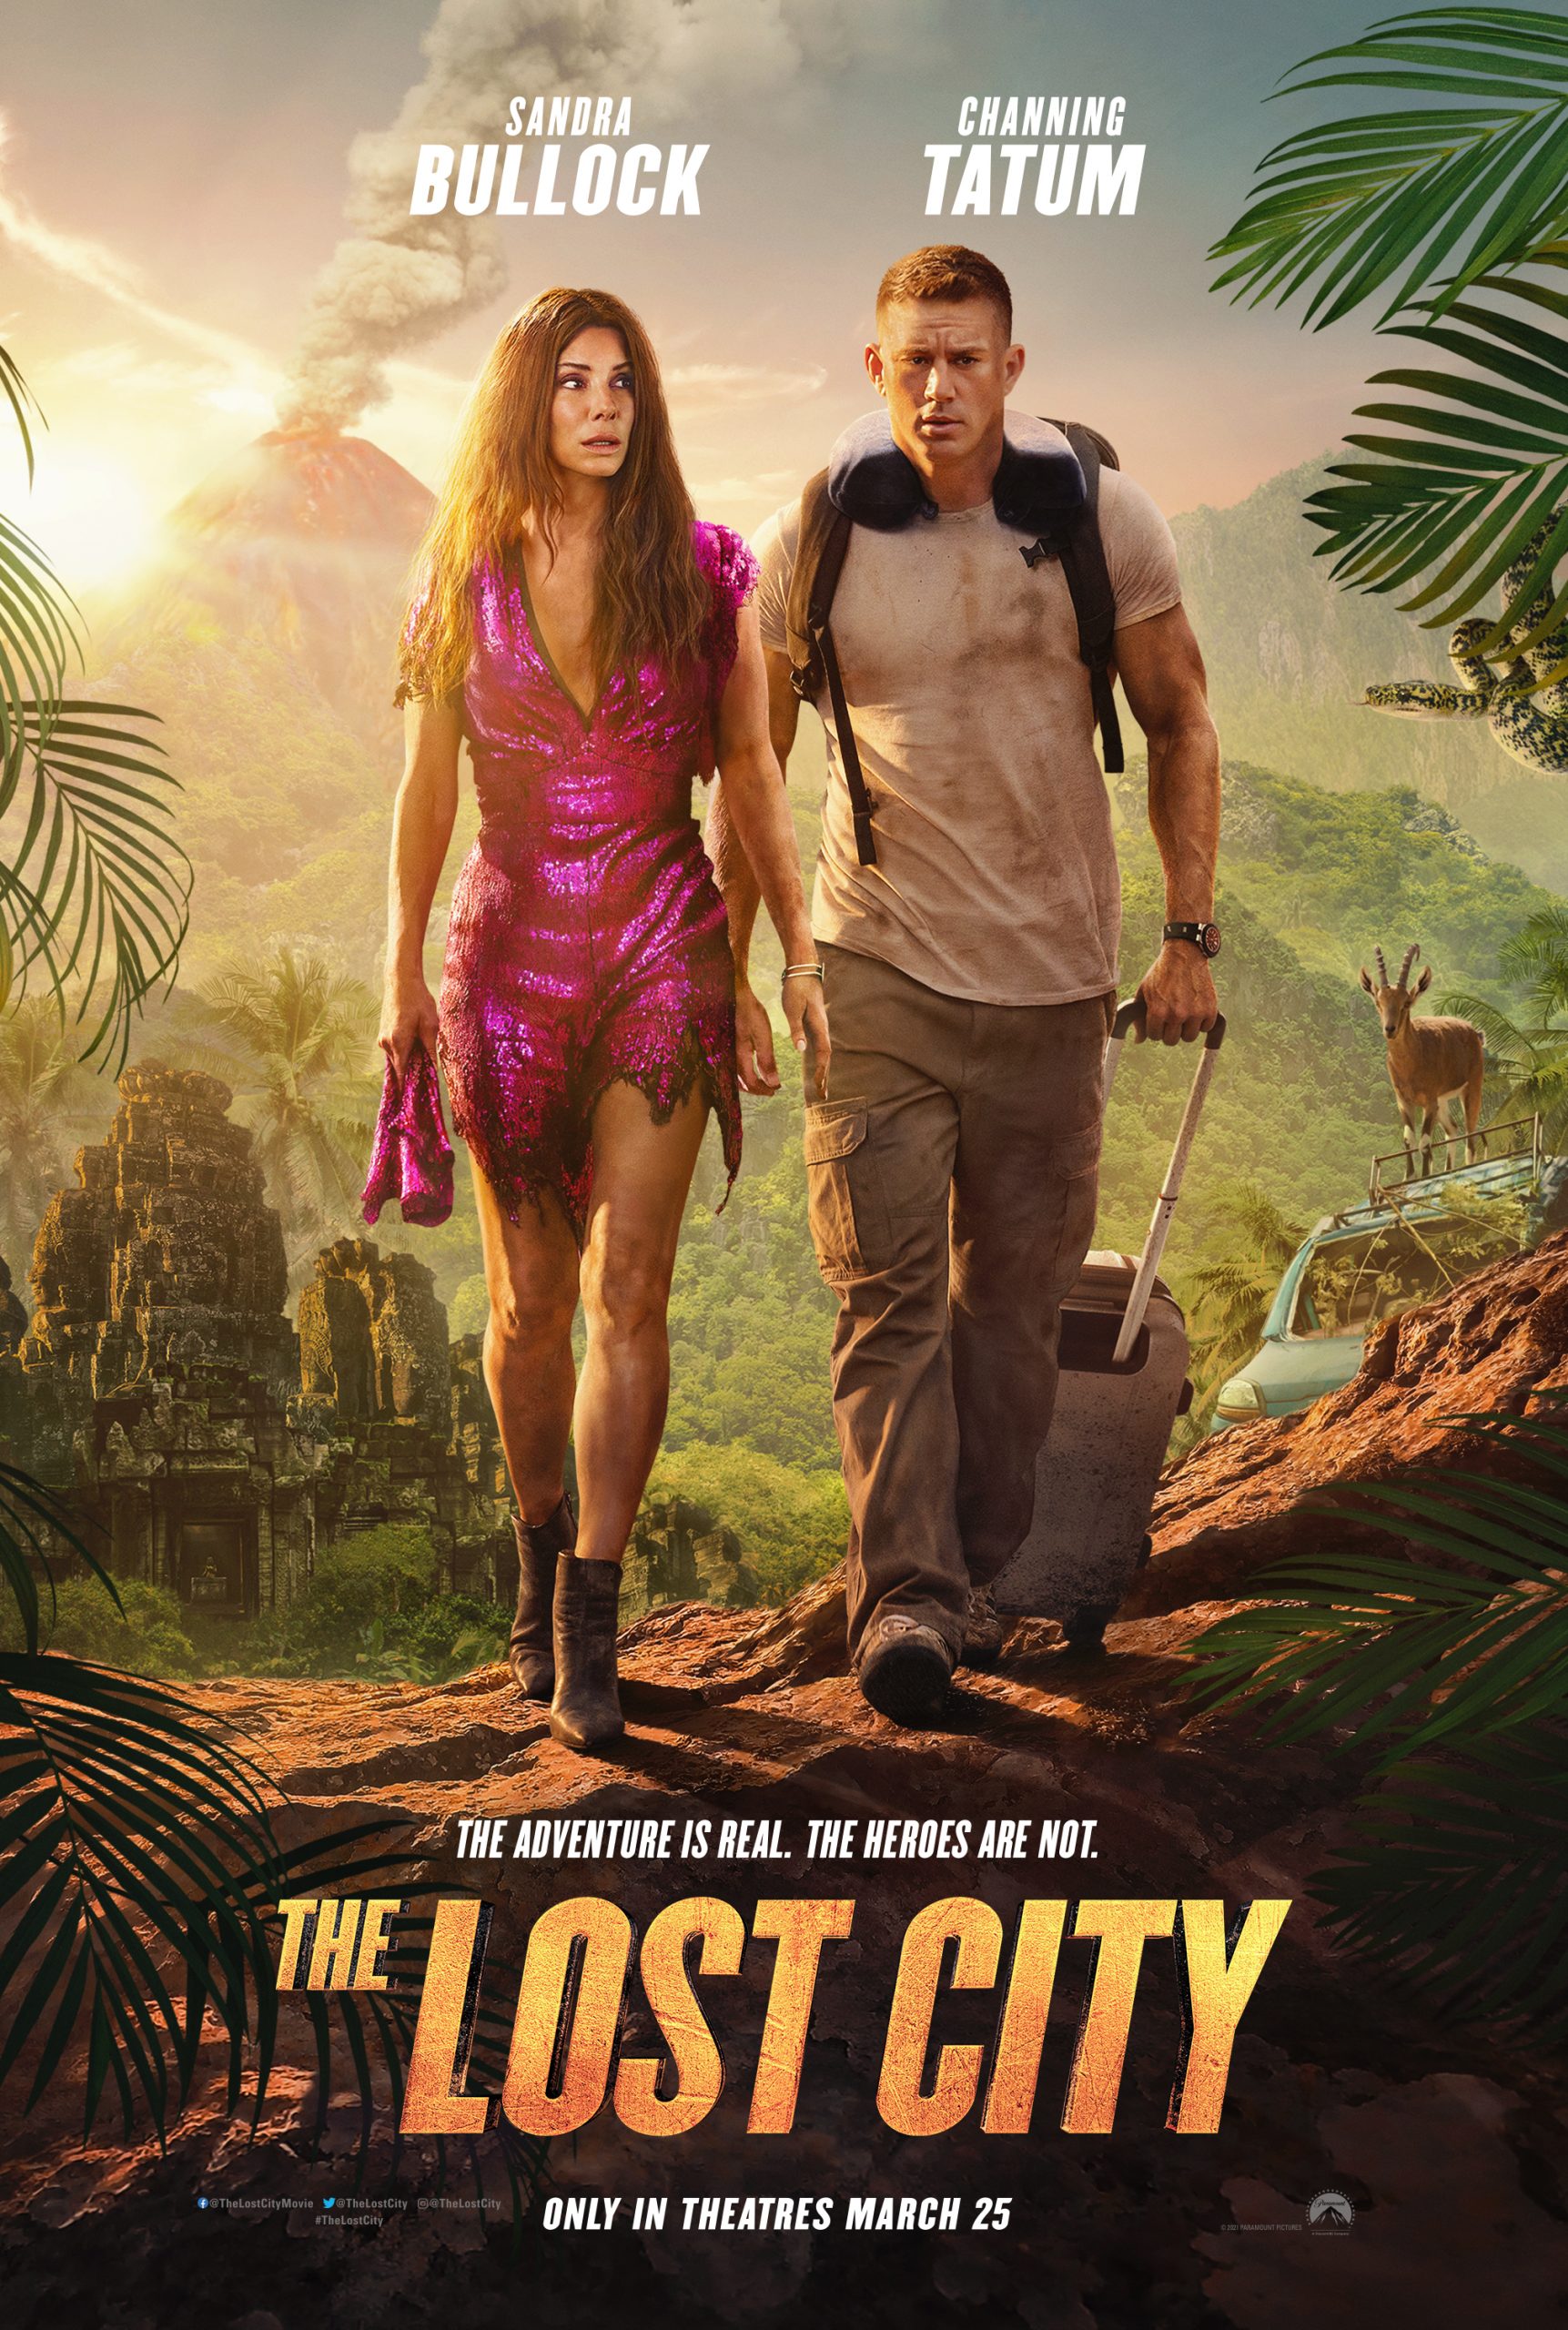 REVIEW: 'The Lost City' movie is a silly, fun adventure that plays to the  strengths of its stars Sandra Bullock and Channing Tatum